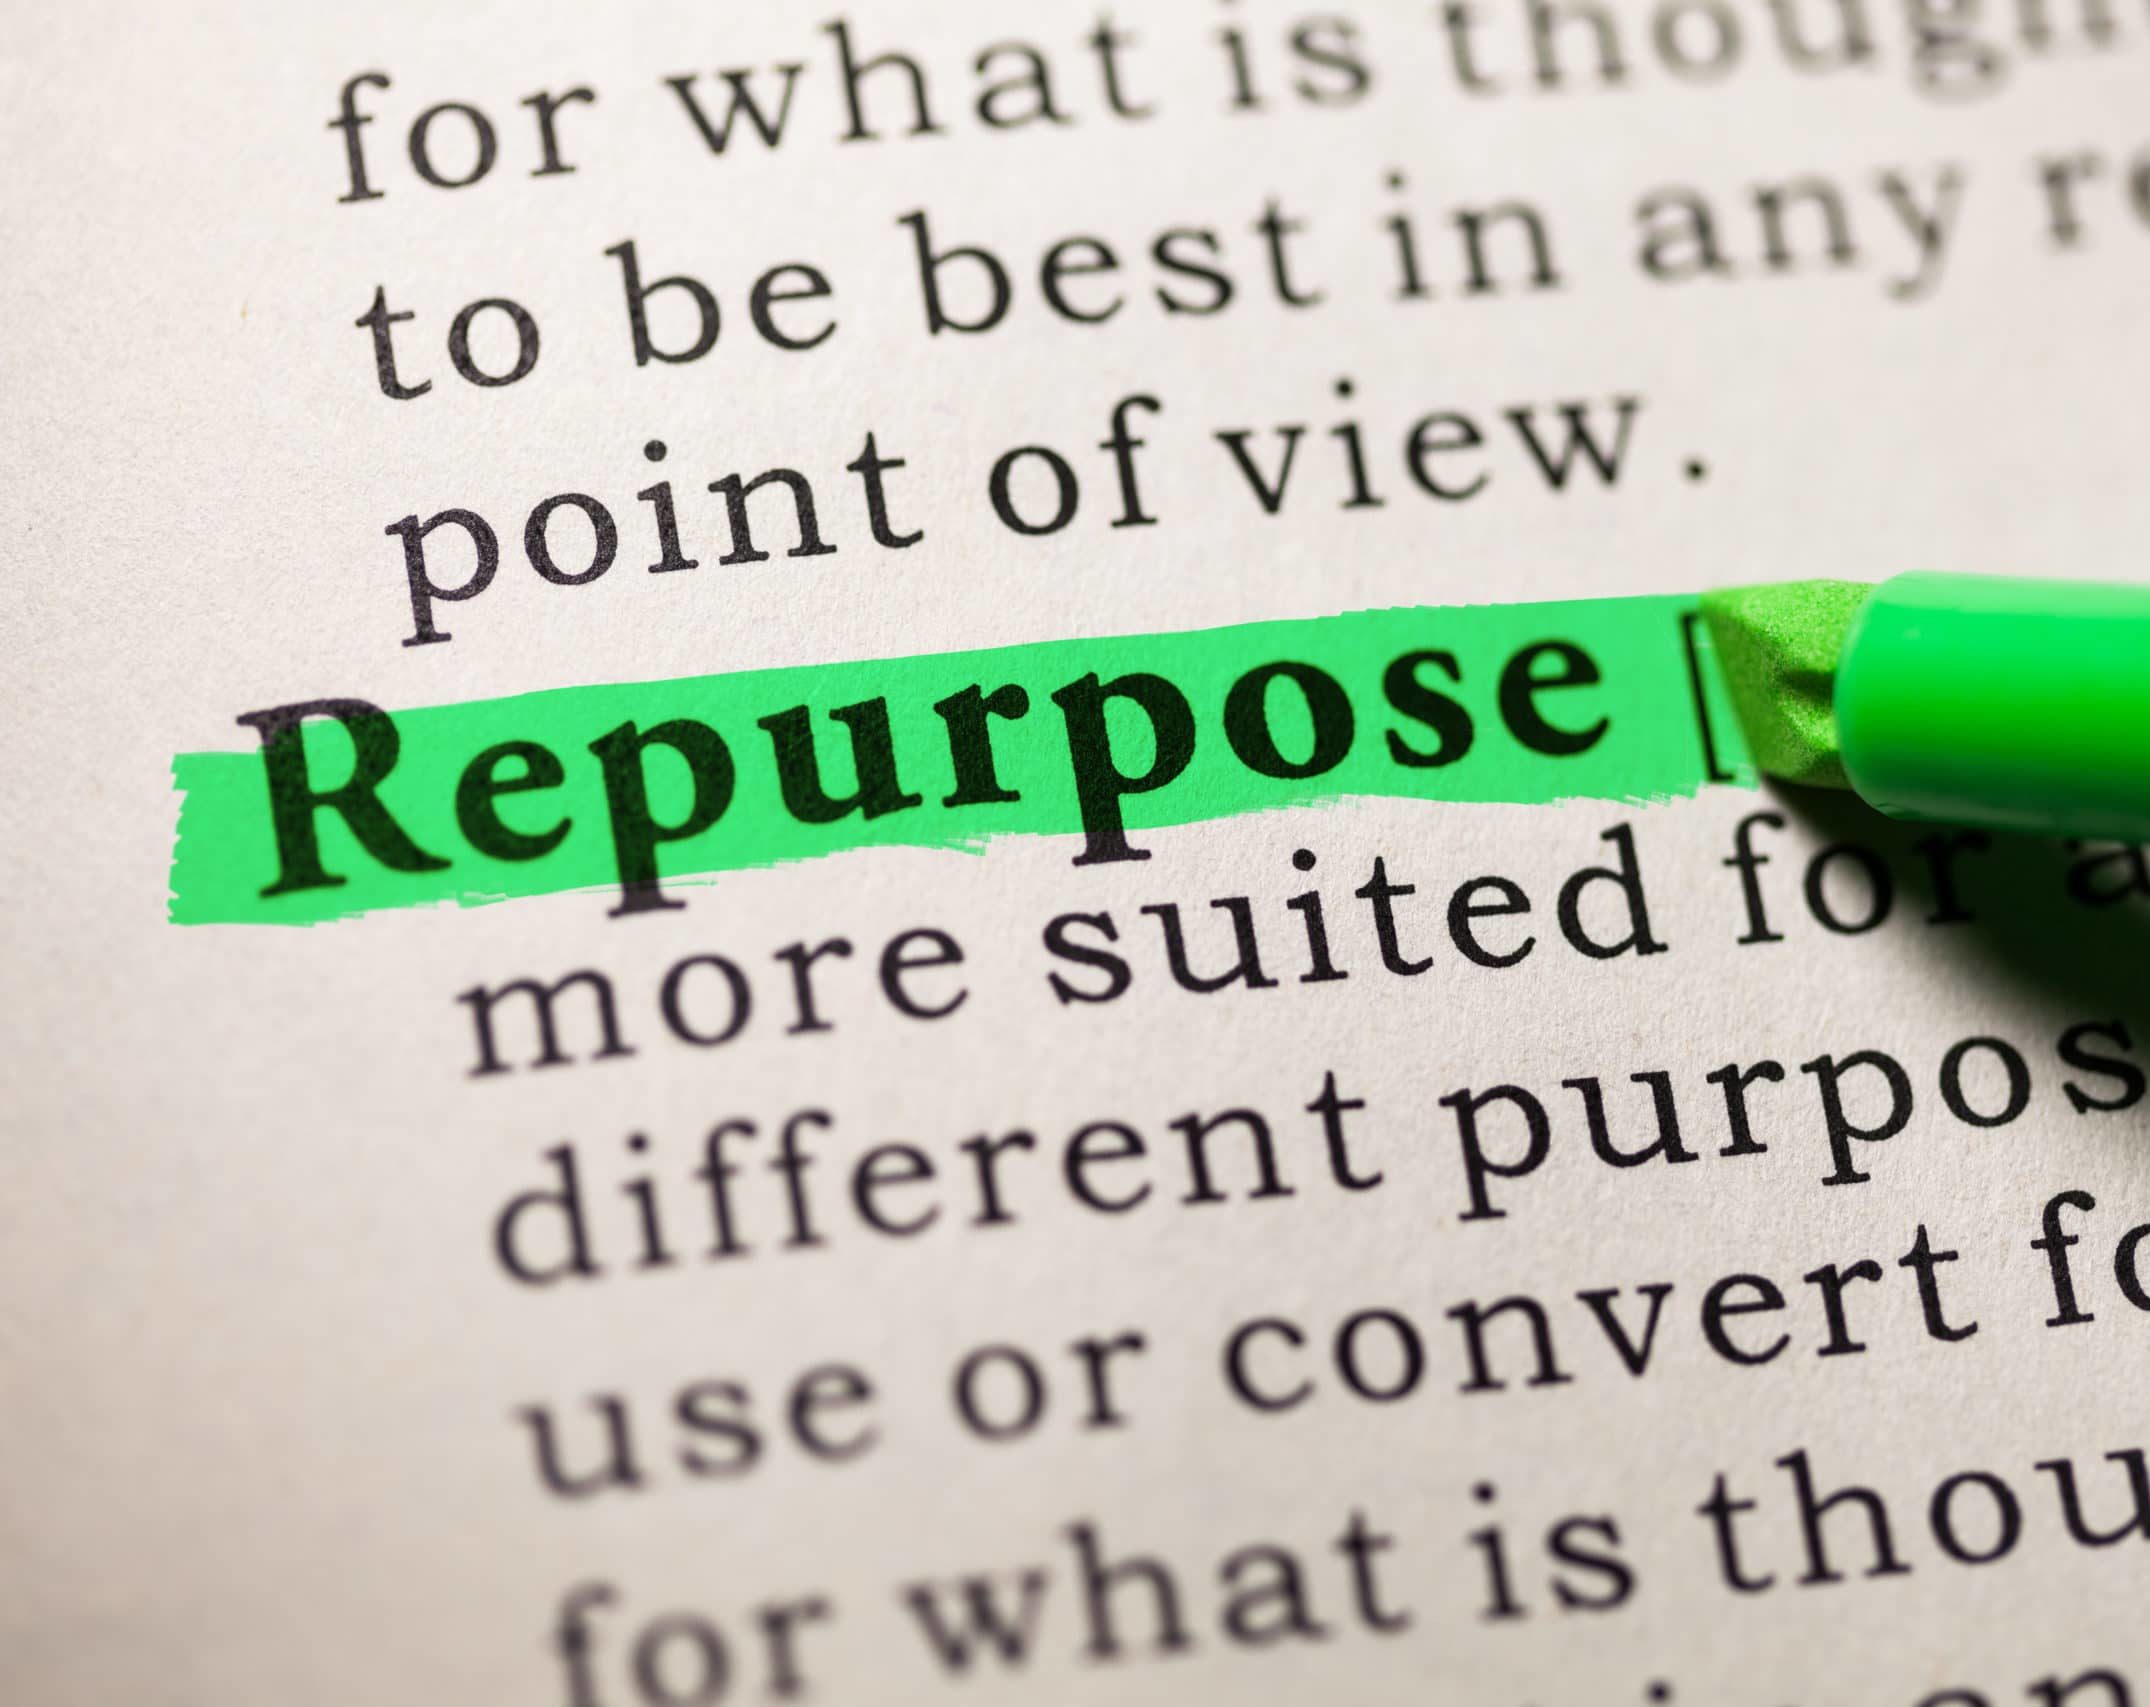 Why You Should Repurpose Your Content